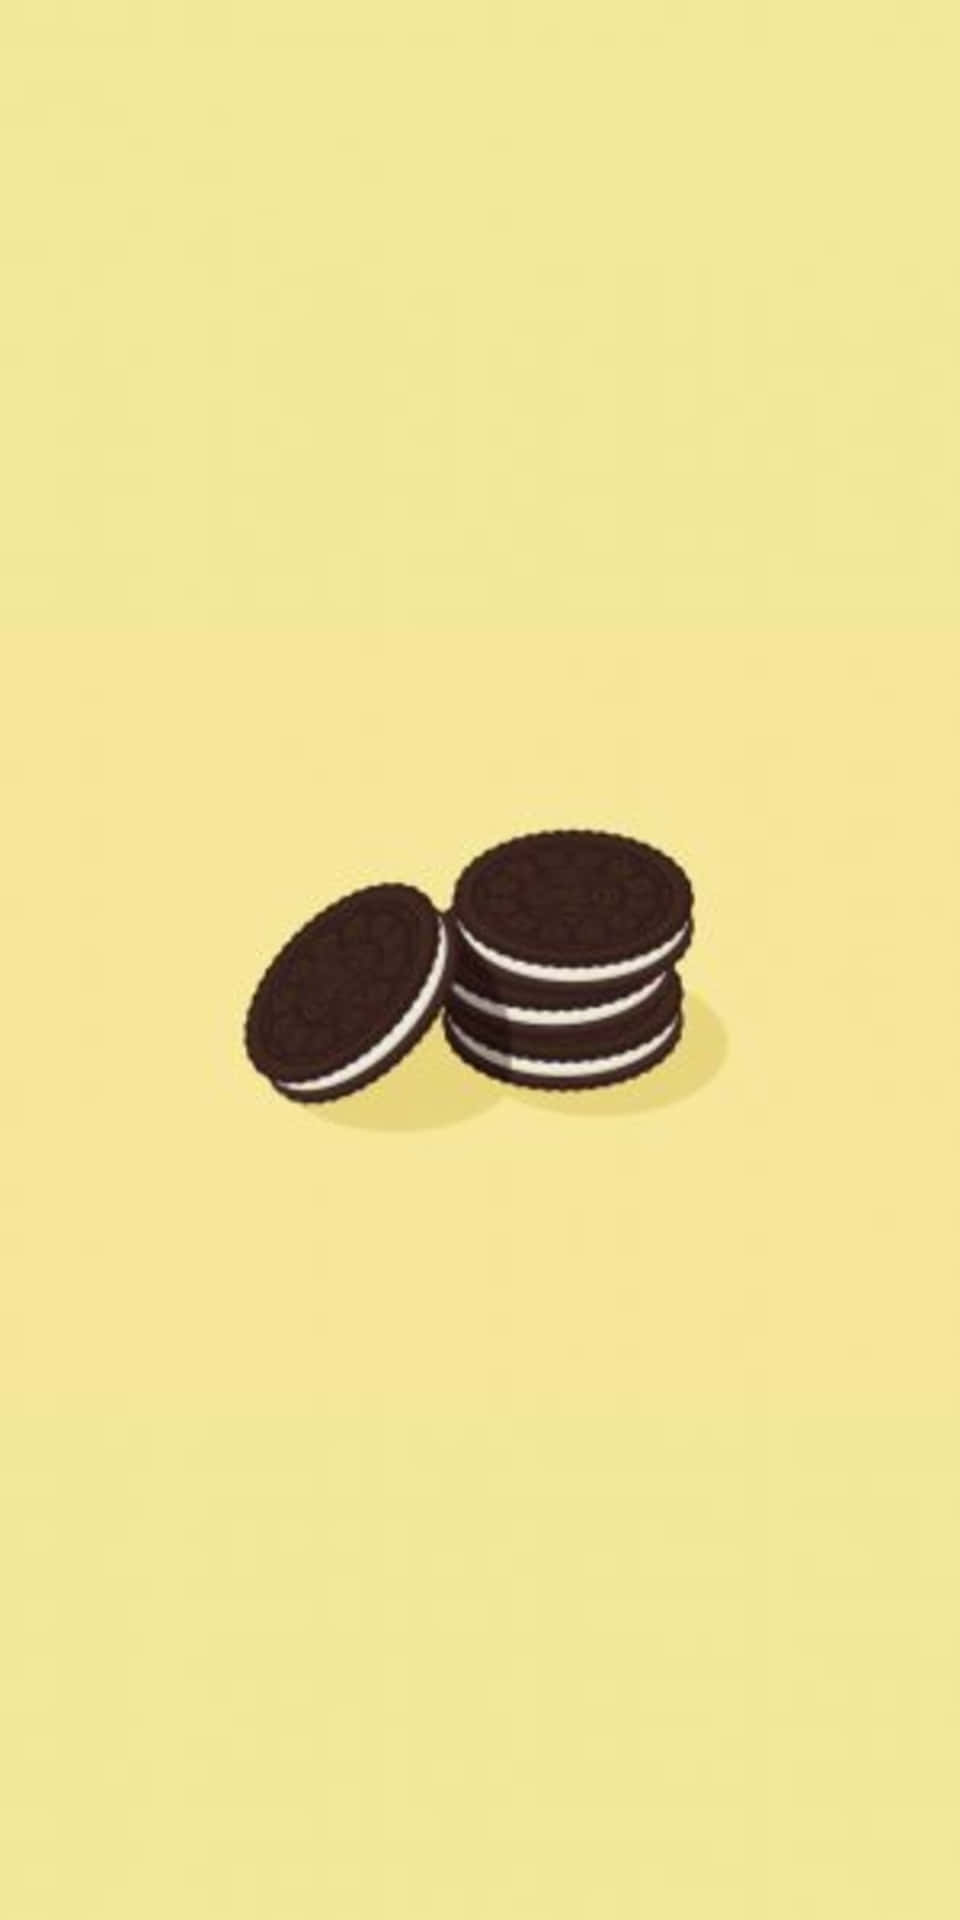 Download Pixel 3 Minimal Background Oreo Cookies On A Yellow Backdrop